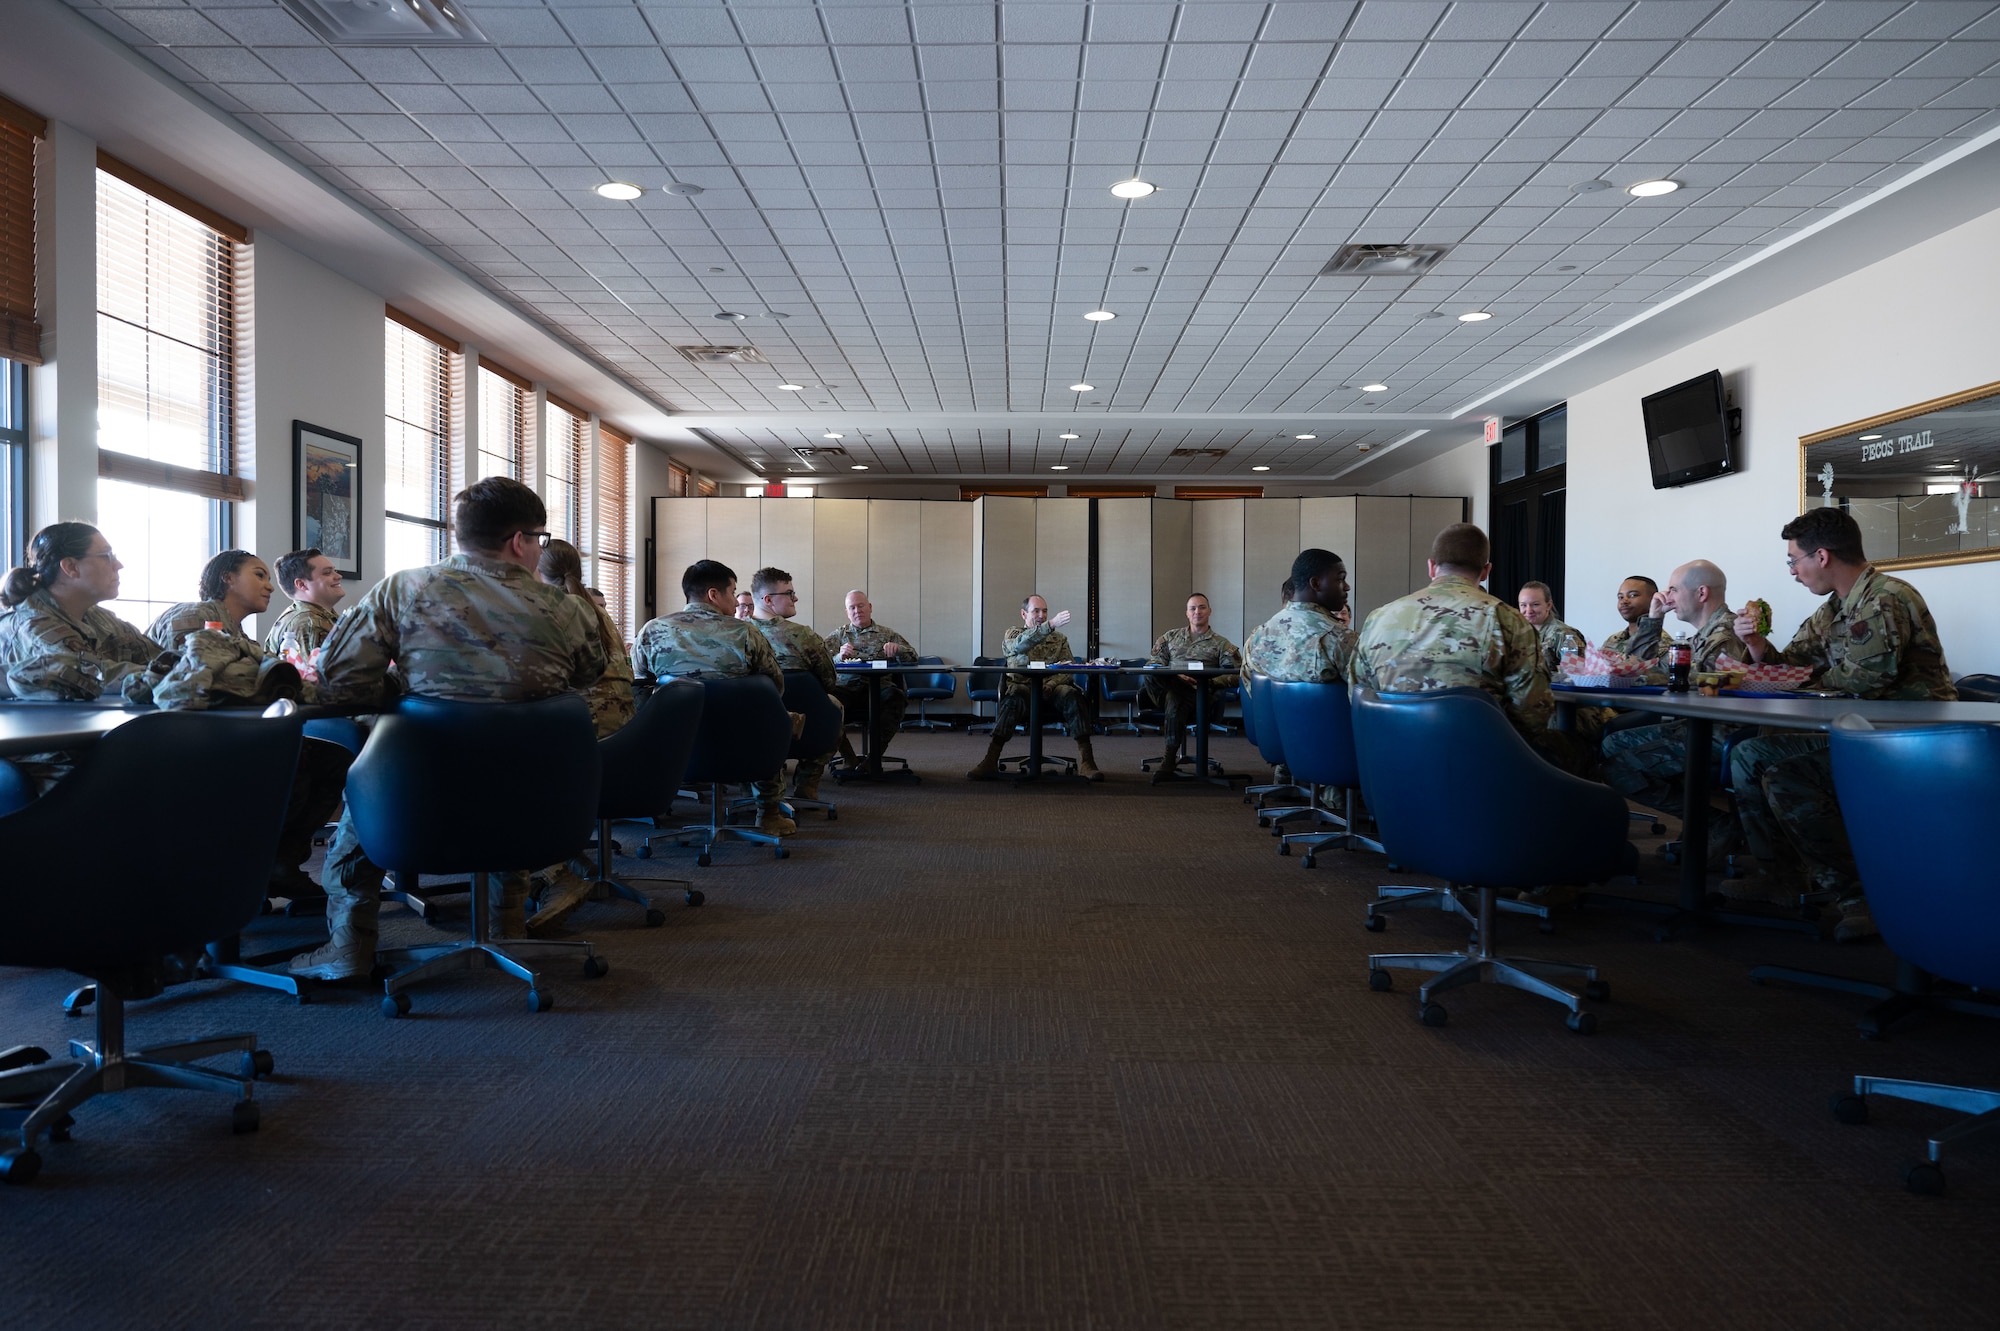 A group of men and women in military uniform sit around tables in a room.